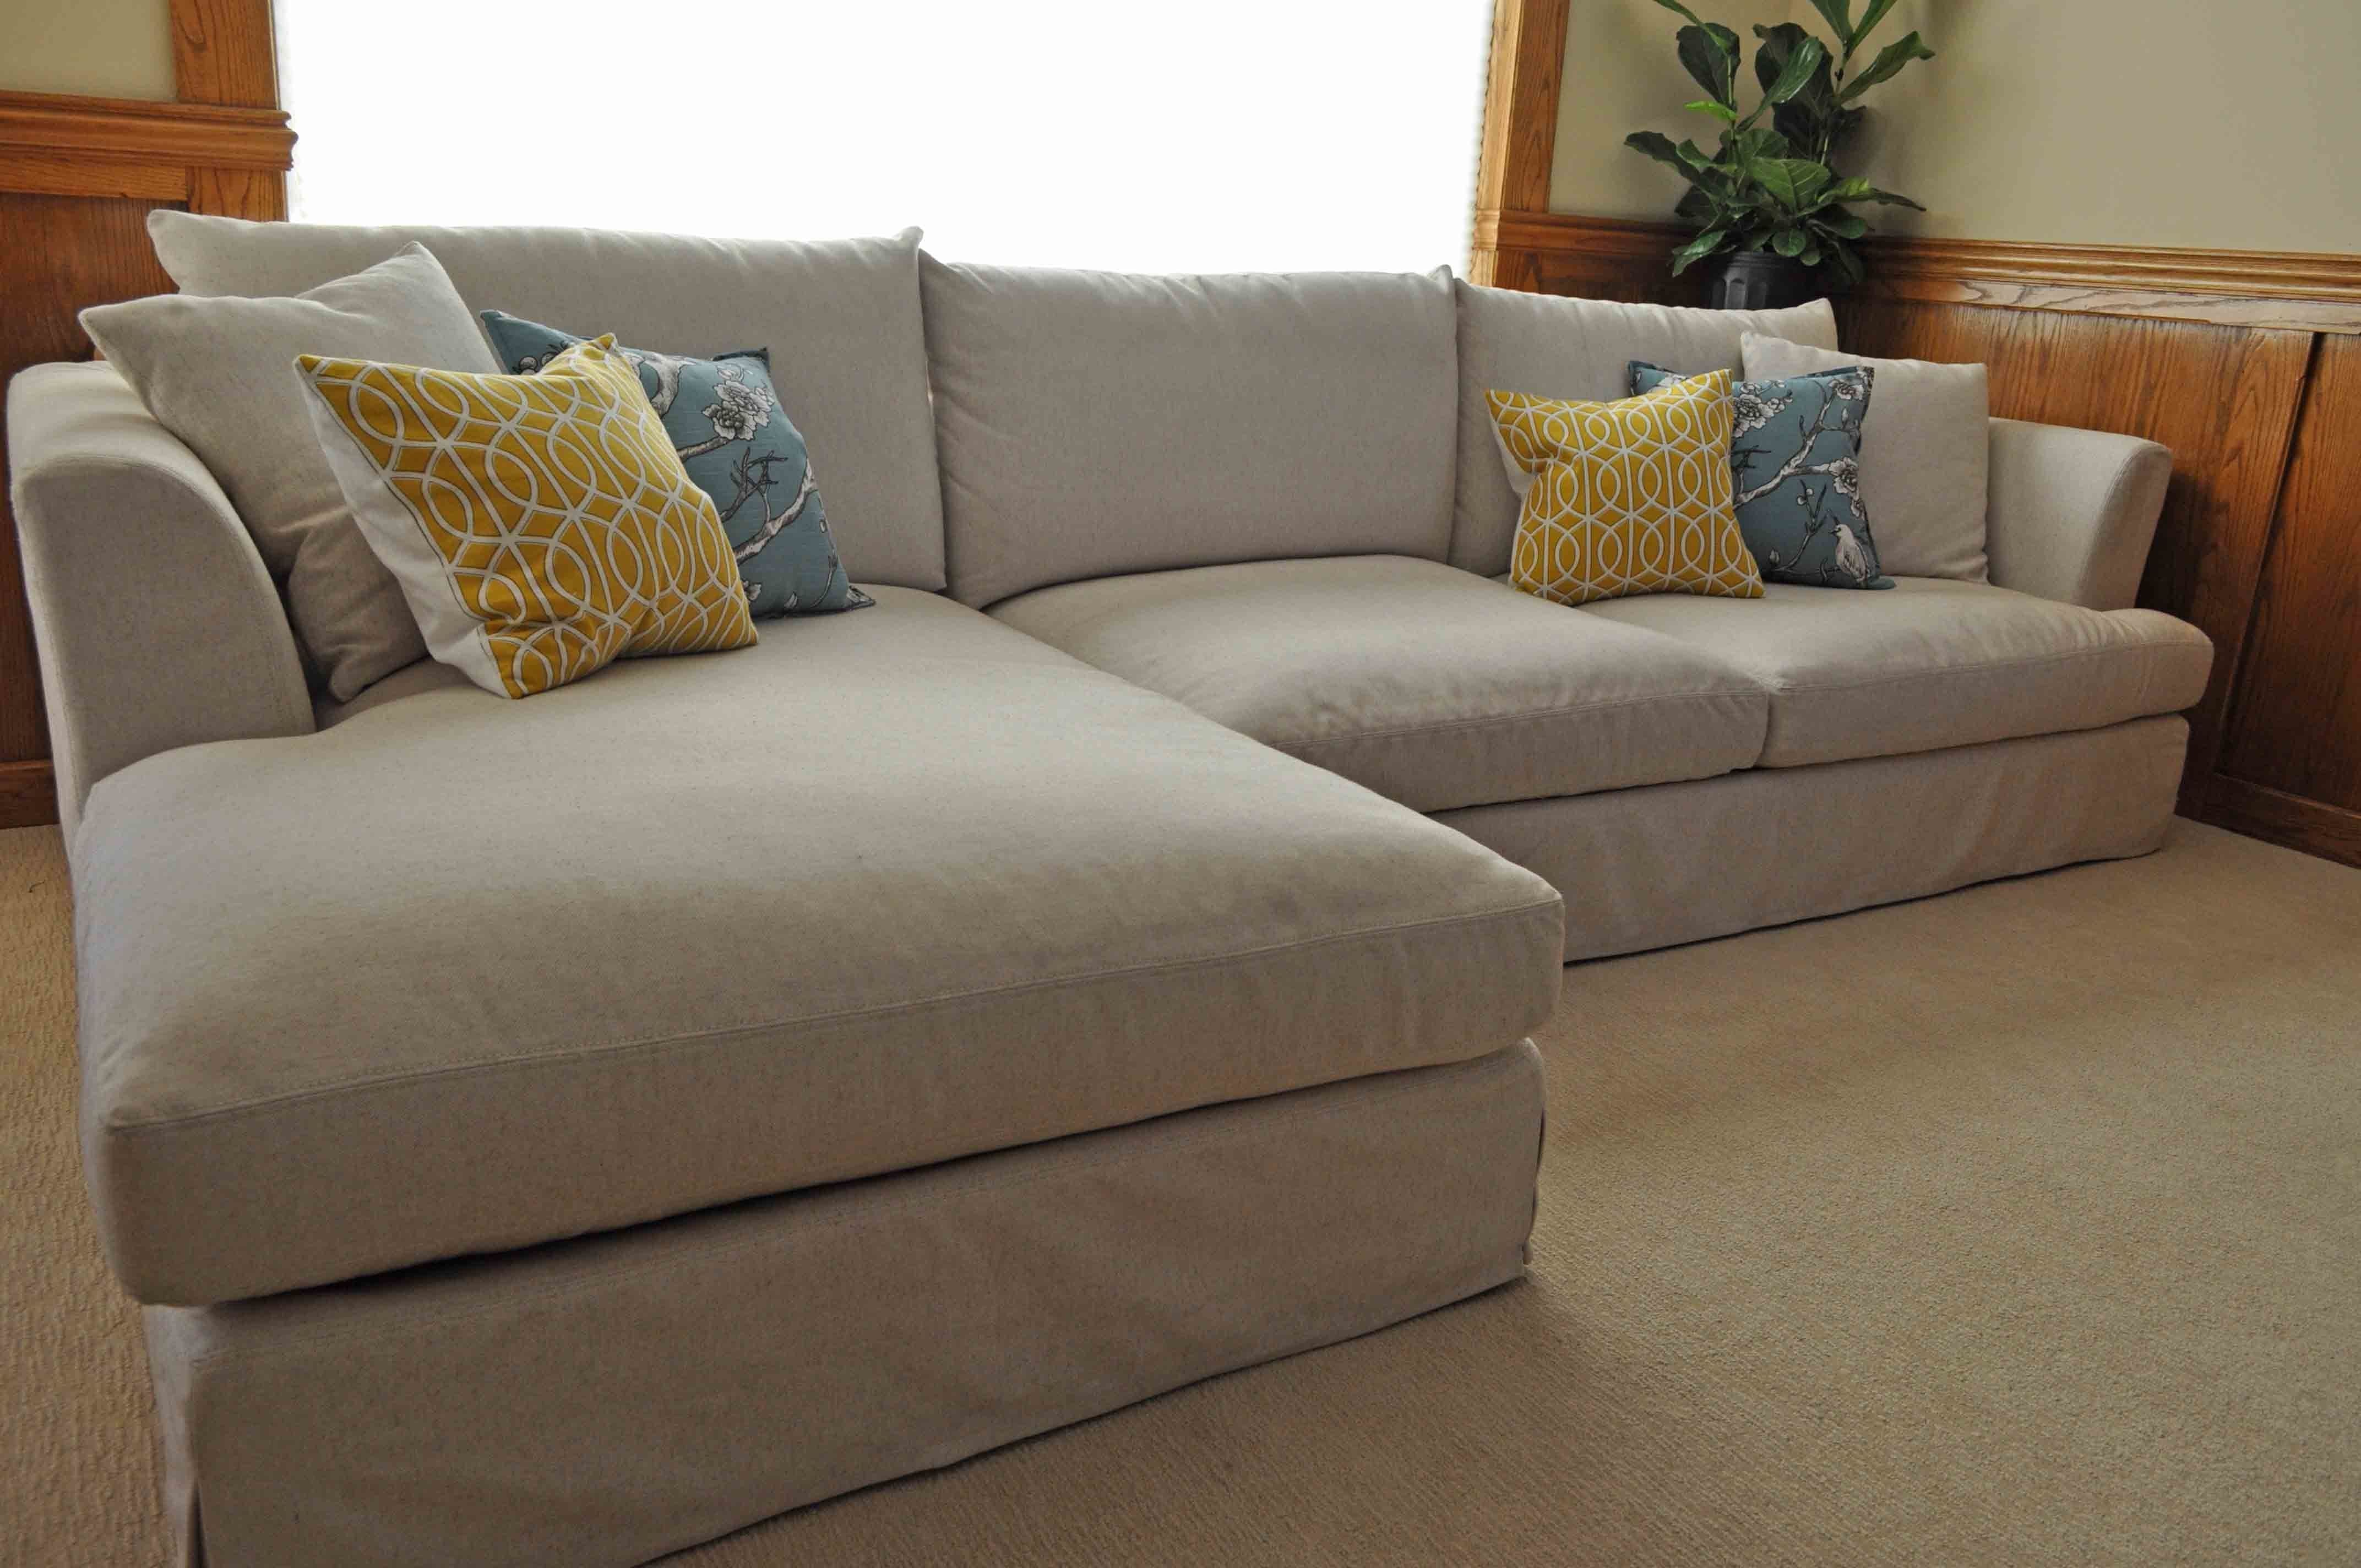 Popular Sofa : Comfortable Sectional Sofas Most Comfortable Sofa Ashley Throughout Comfortable Sectional Sofas (View 1 of 15)